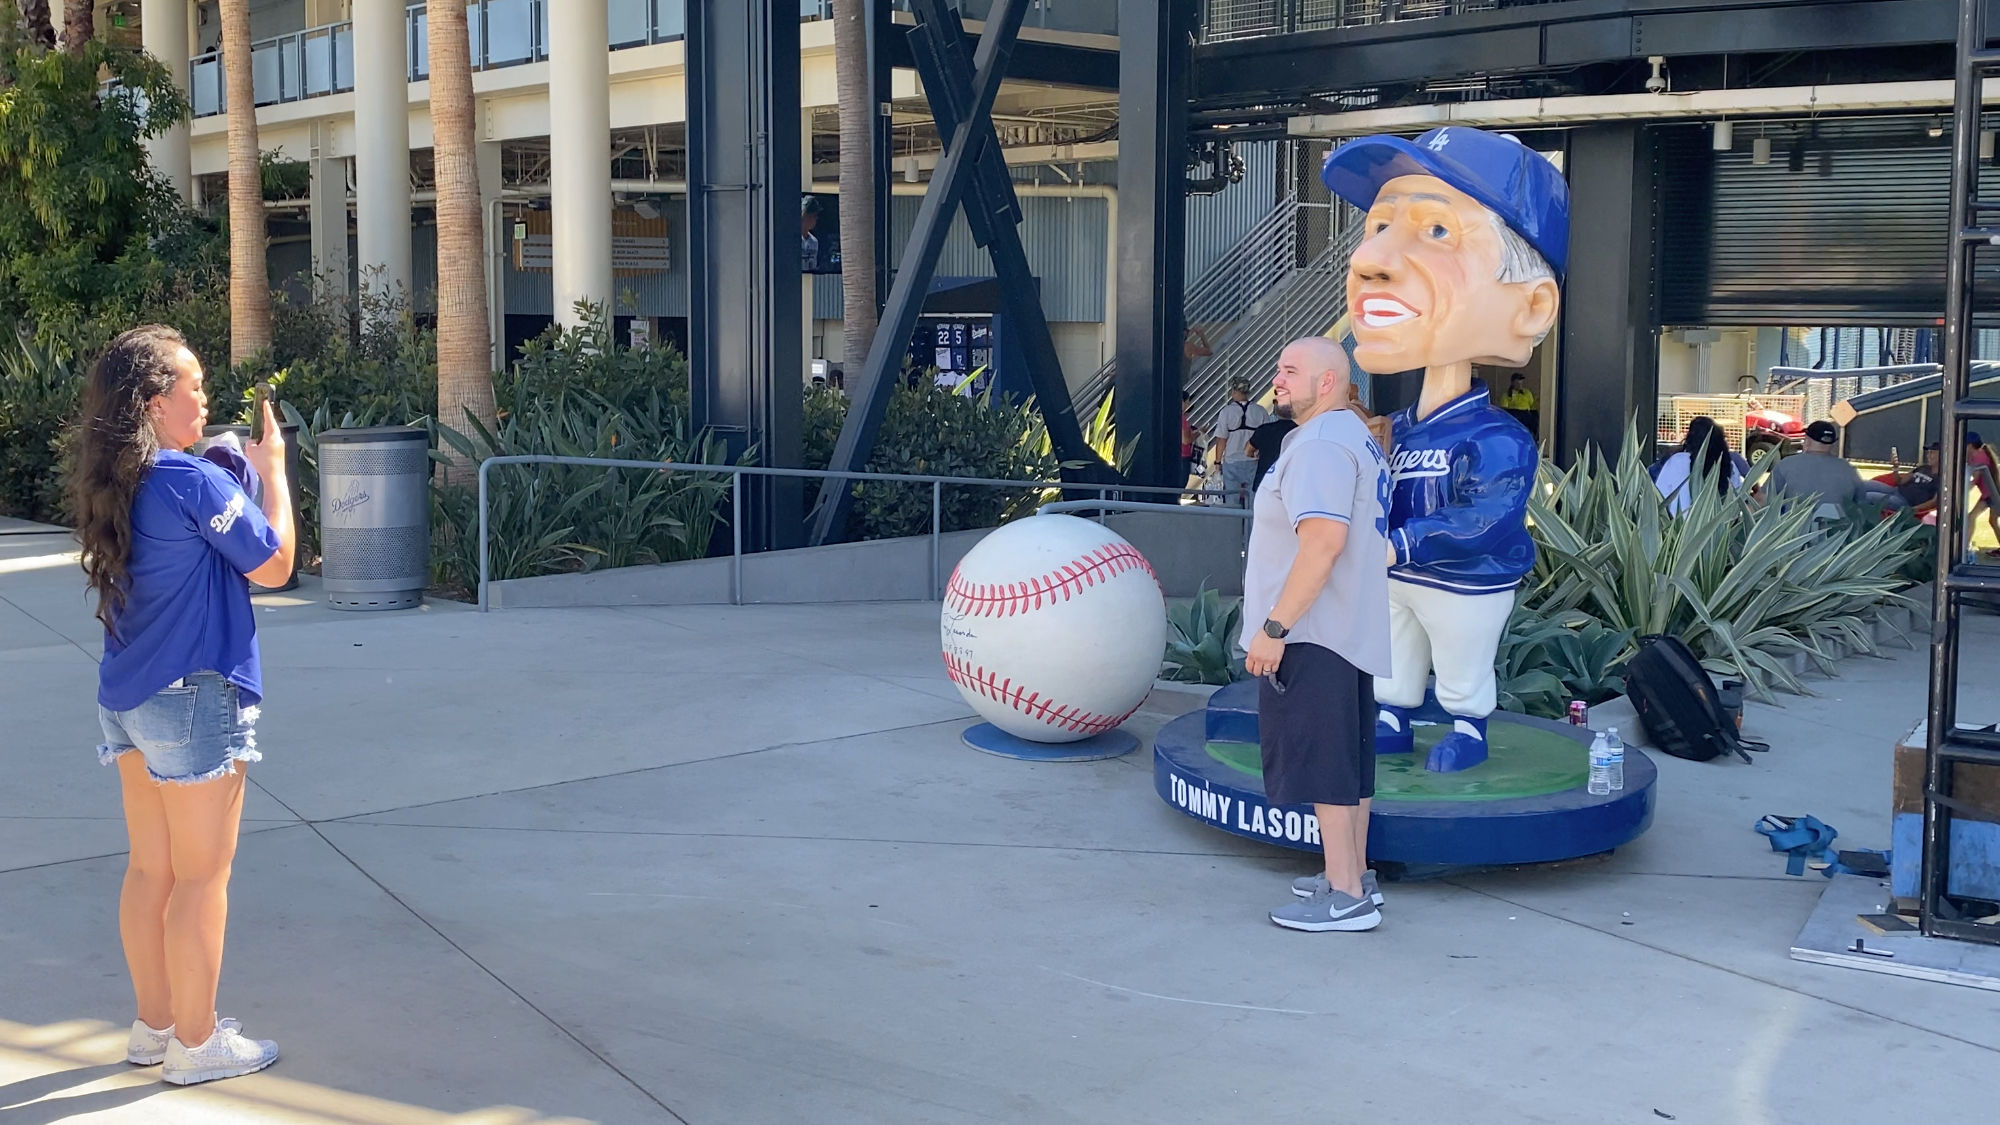 Larger than life Bobbleheads Tommy Lasorda